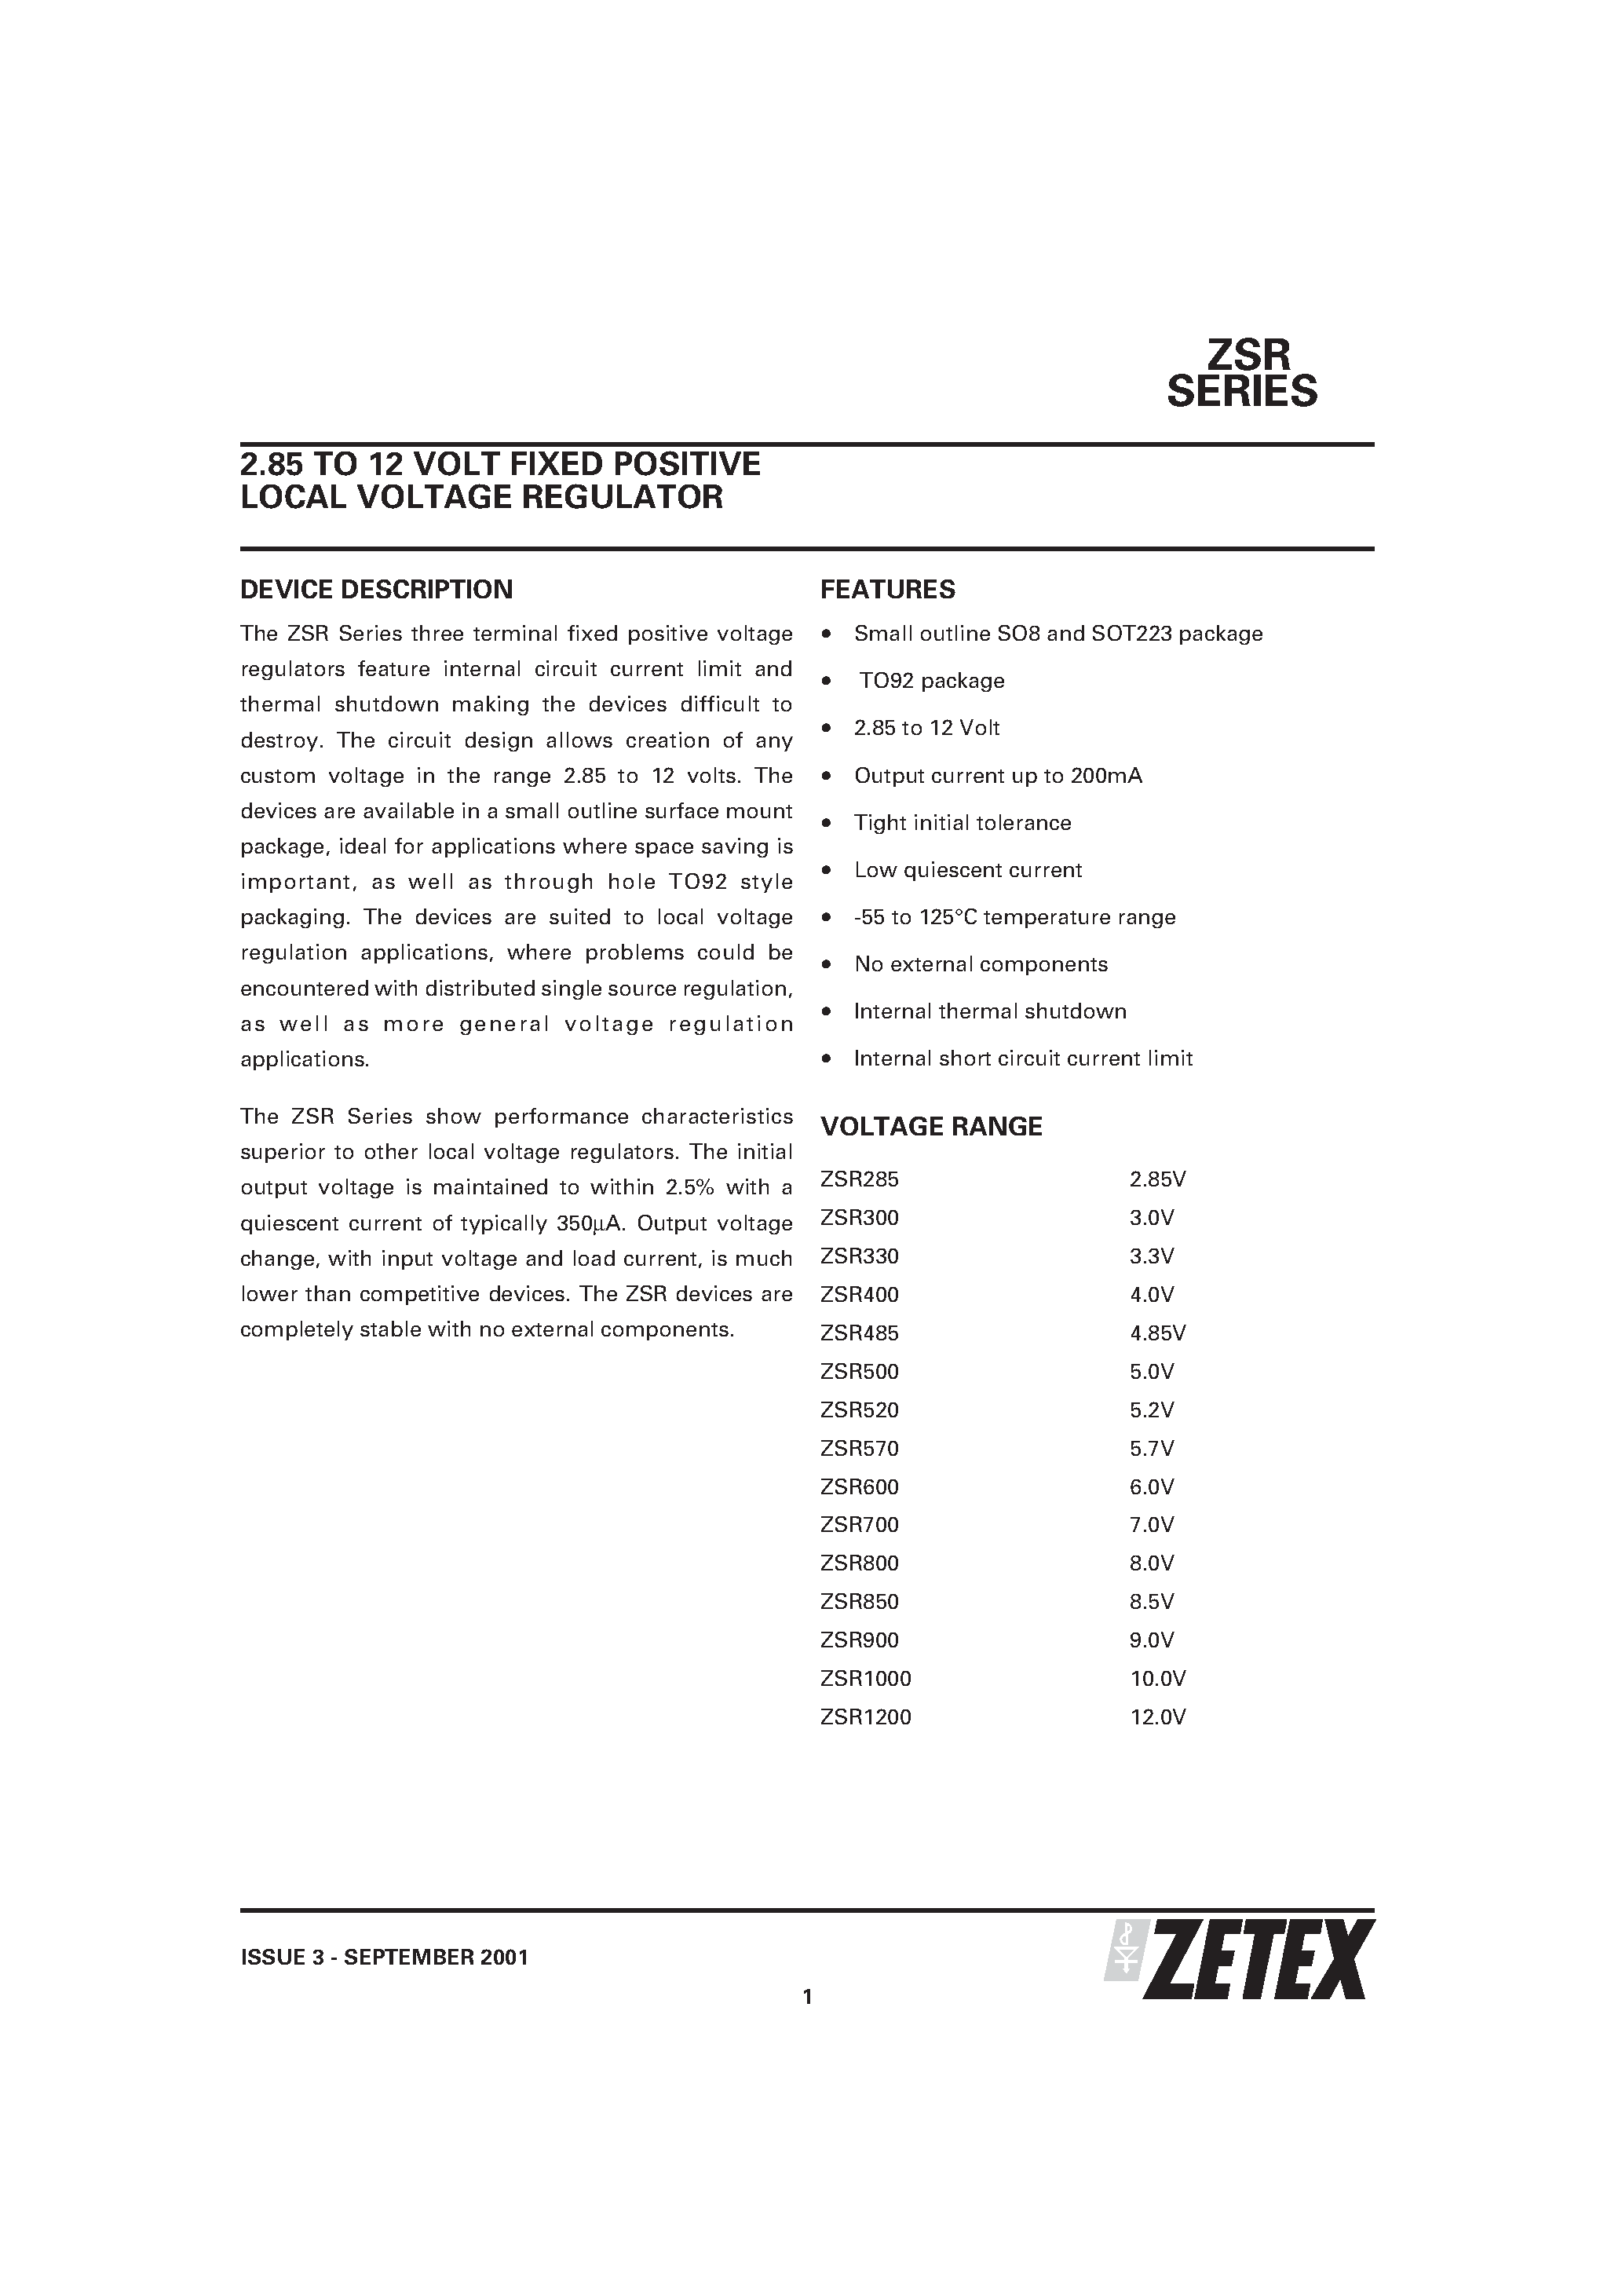 Datasheet ZSR900C - 2.85 TO 12 VOLT FIXED POSITIVE LOCAL VOLTAGE REGULATOR page 1